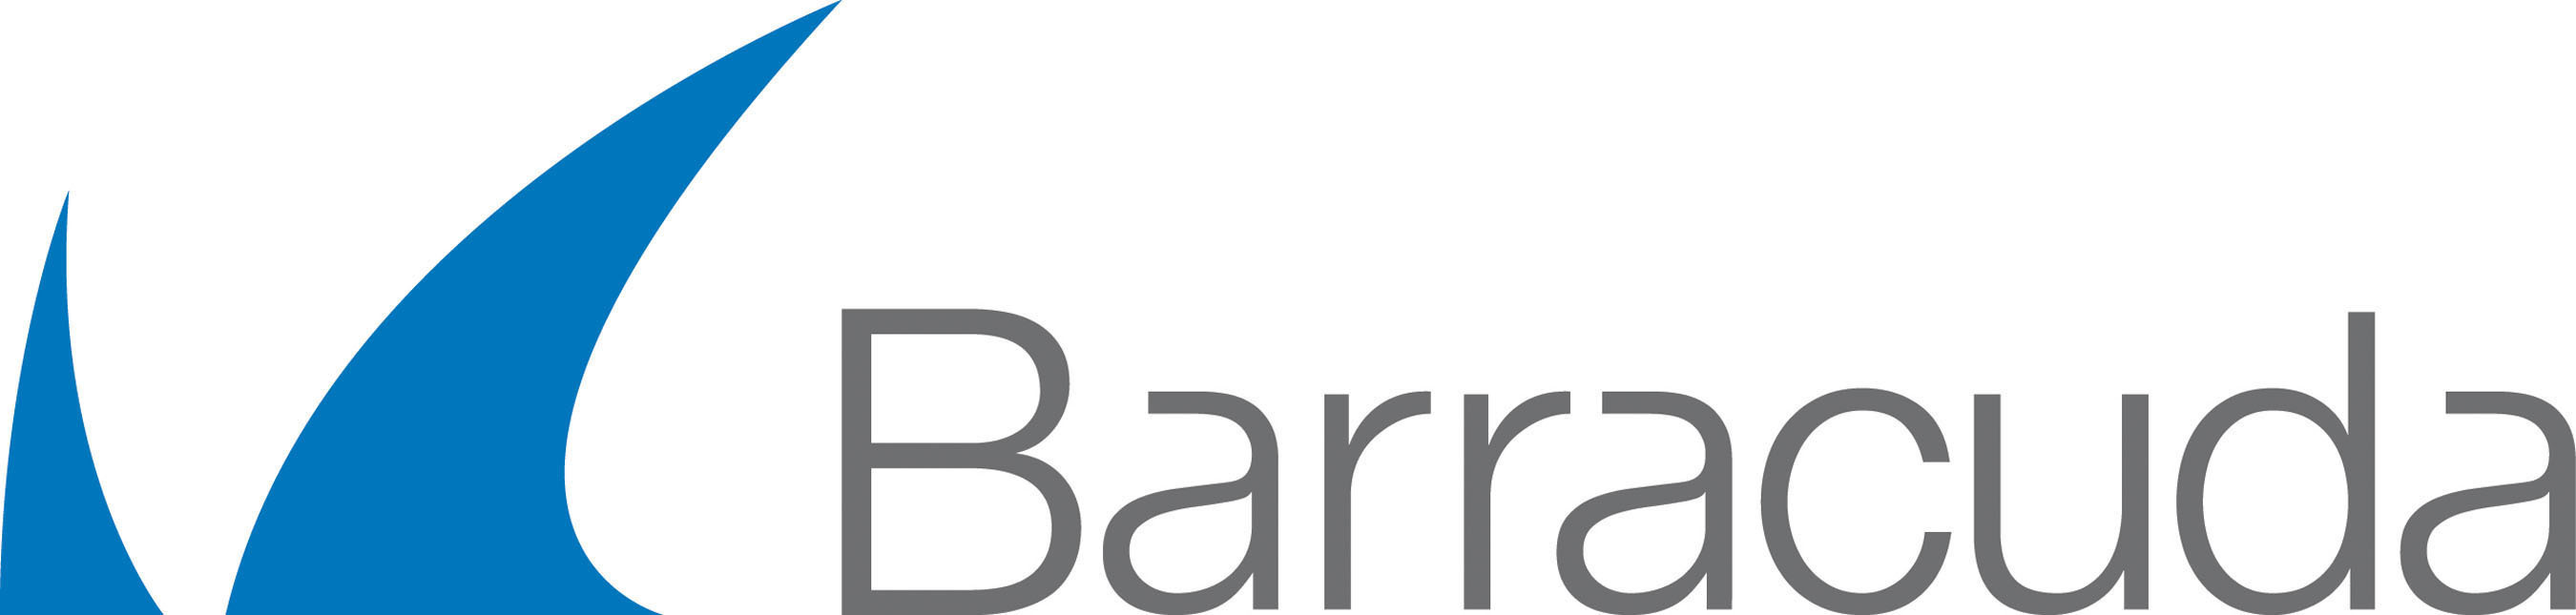 Barracuda Announces Web Security Gateway Updates to Enhance Advanced Threat Protection and Network Performance, Adds New Chromebook Security Extension